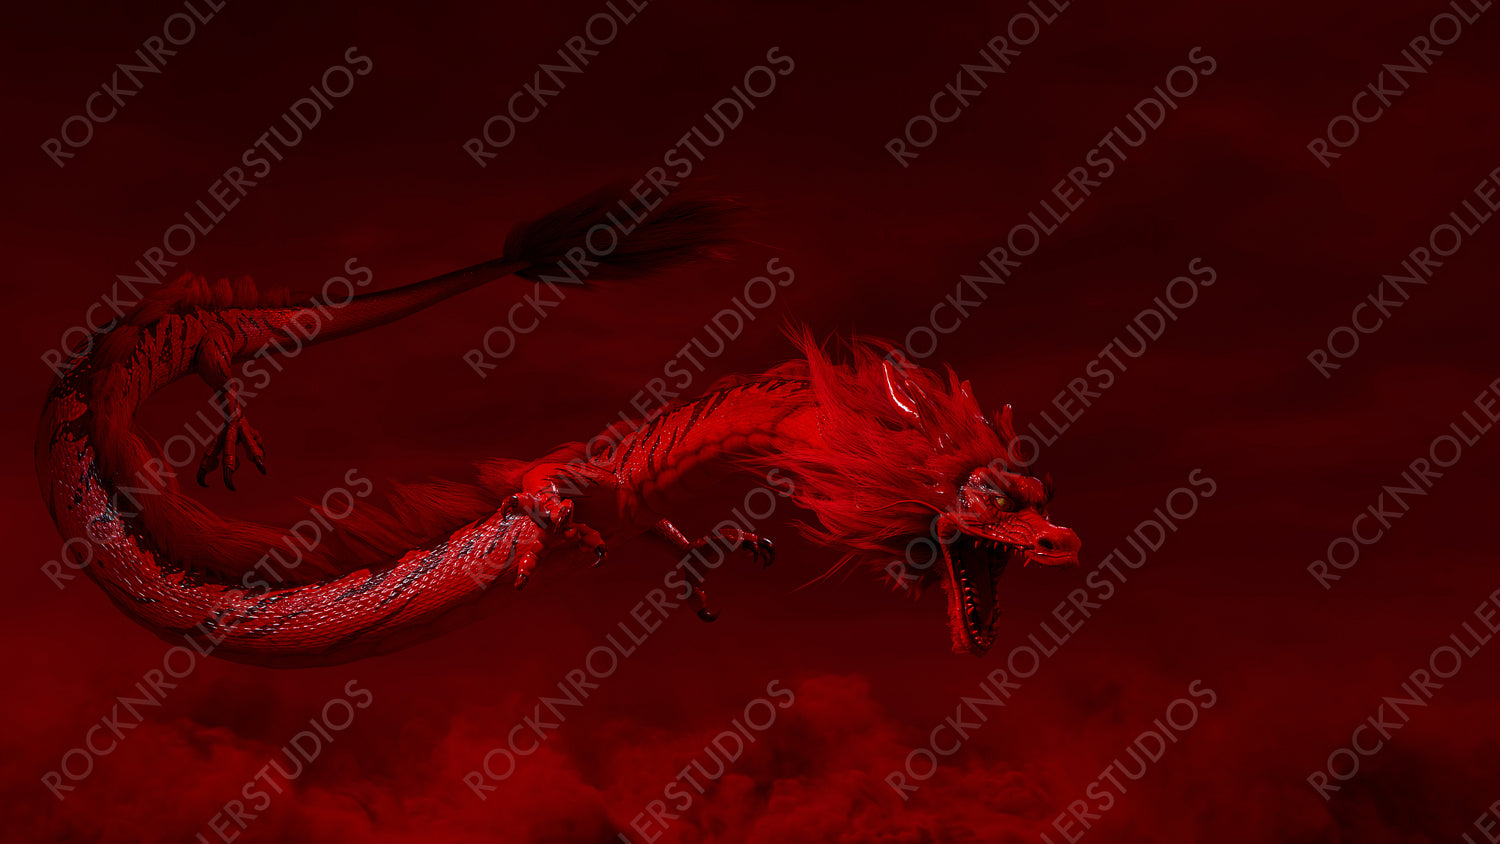 Roaring Chinese Dragon against a Red Cloudy Sky. New Year Concept with copy-space.